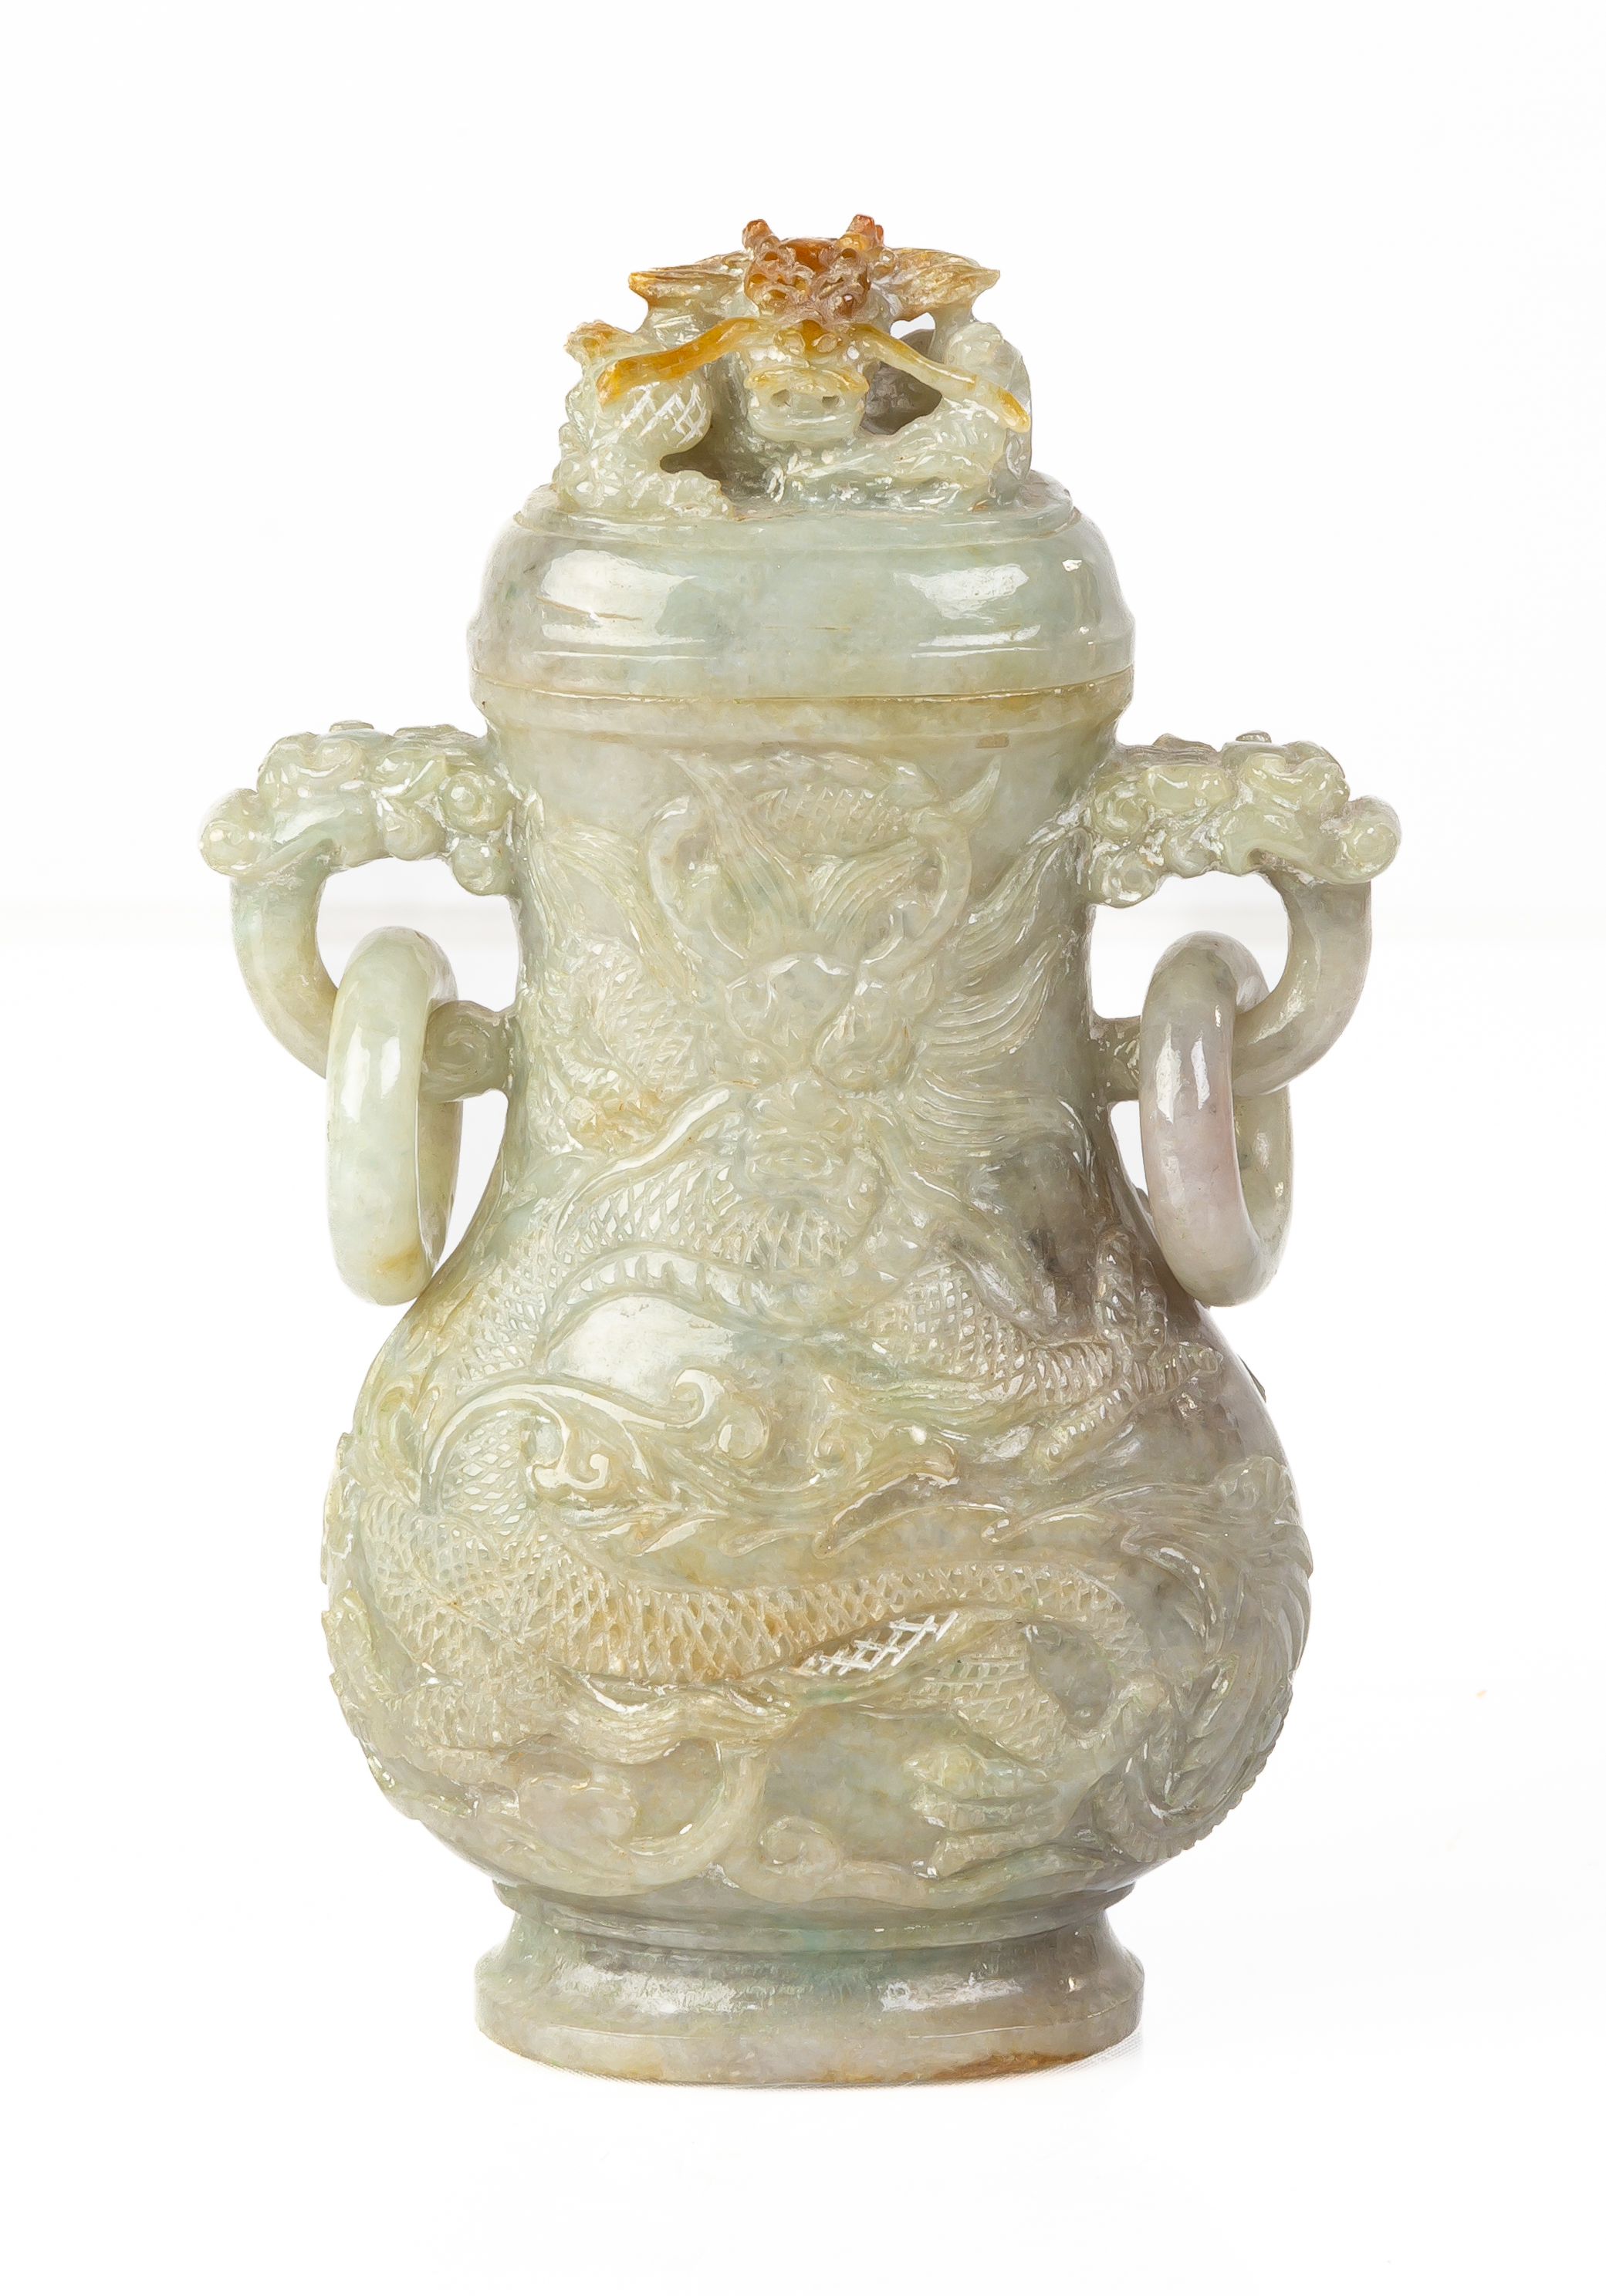 CHINESE CARVED JADE COVERED URN 2f367f